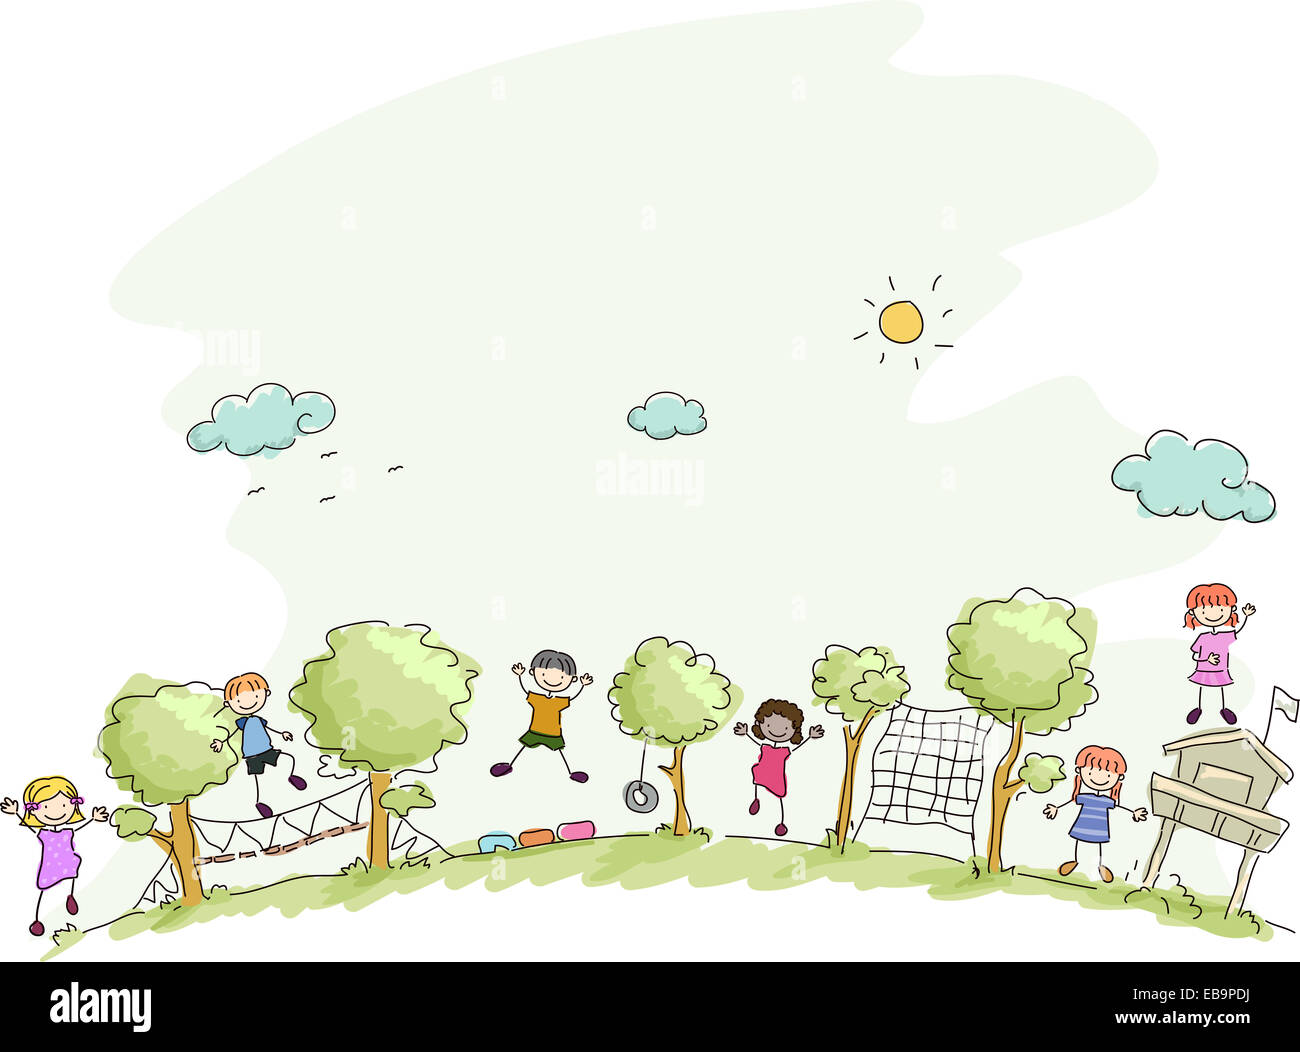 Illustration Featuring Kids Playing in a Summer Camp Stock Photo